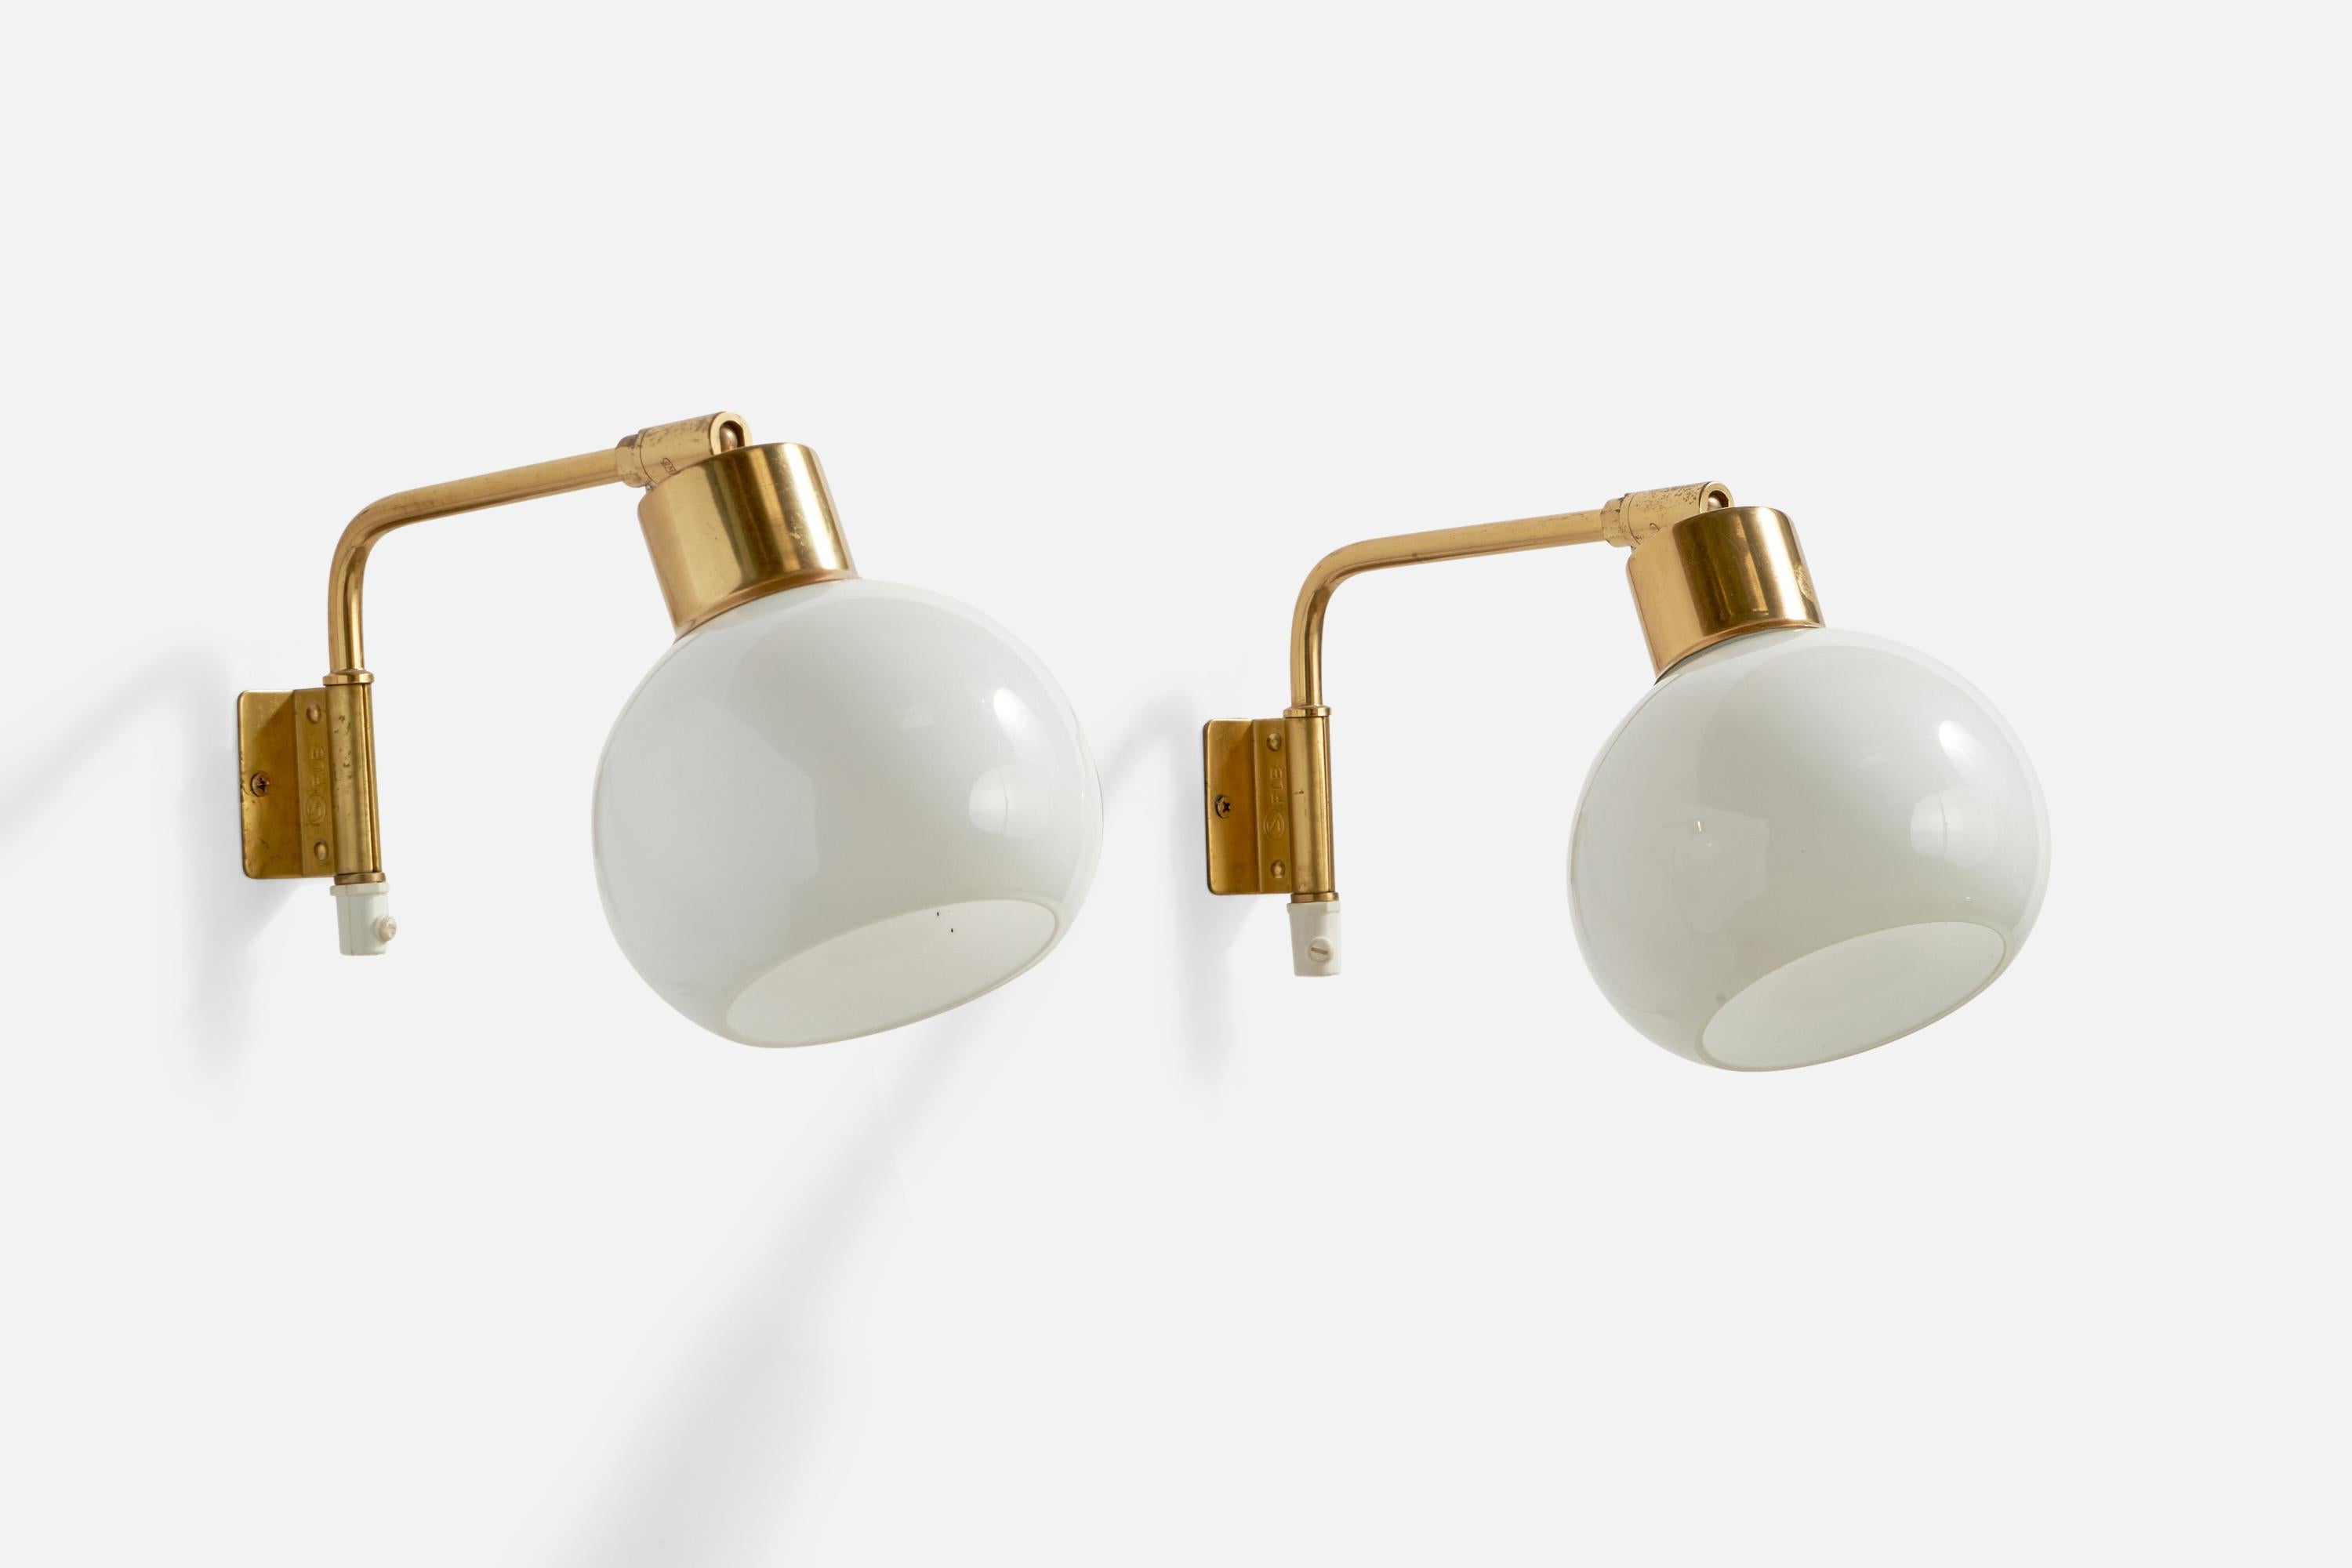 A pair of adjustable brass and opaline glass wall lights designed and produced by Falkenbergs Belysning, Sweden, 1960s.

Overall Dimensions (inches): 6.35” H x 5.1” W x 9.8” D
Back Plate Dimensions (inches): 2” H x 1.65” W x 0.6” D
Bulb